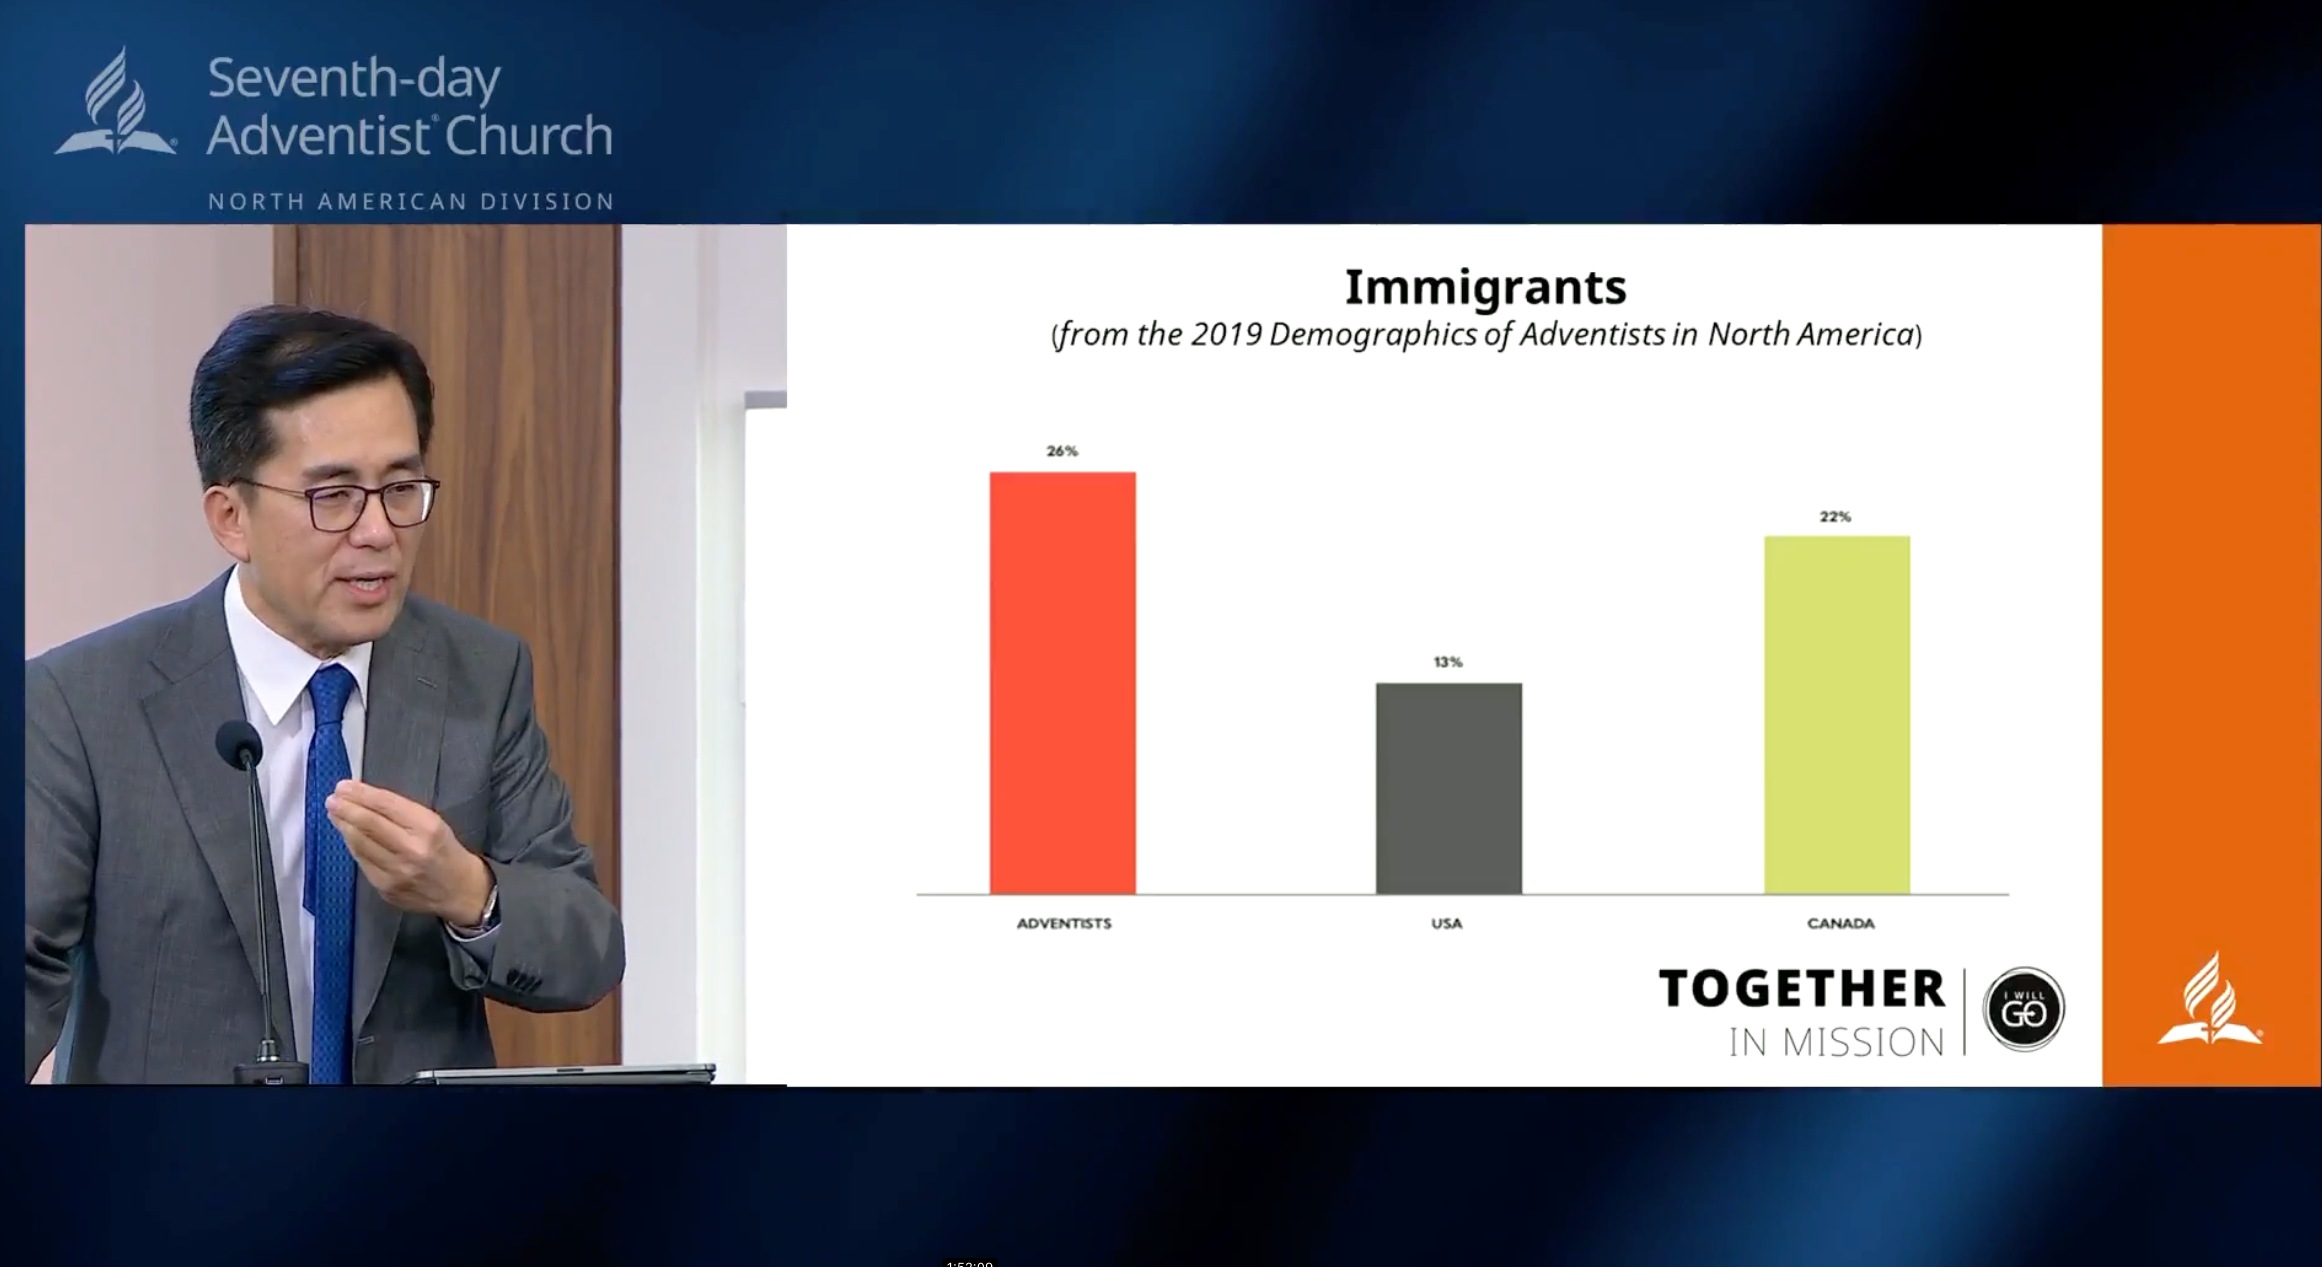 An Asian man in front of a graph about the number of immigrants in the U.S. and Canada compared to the Adventist church.